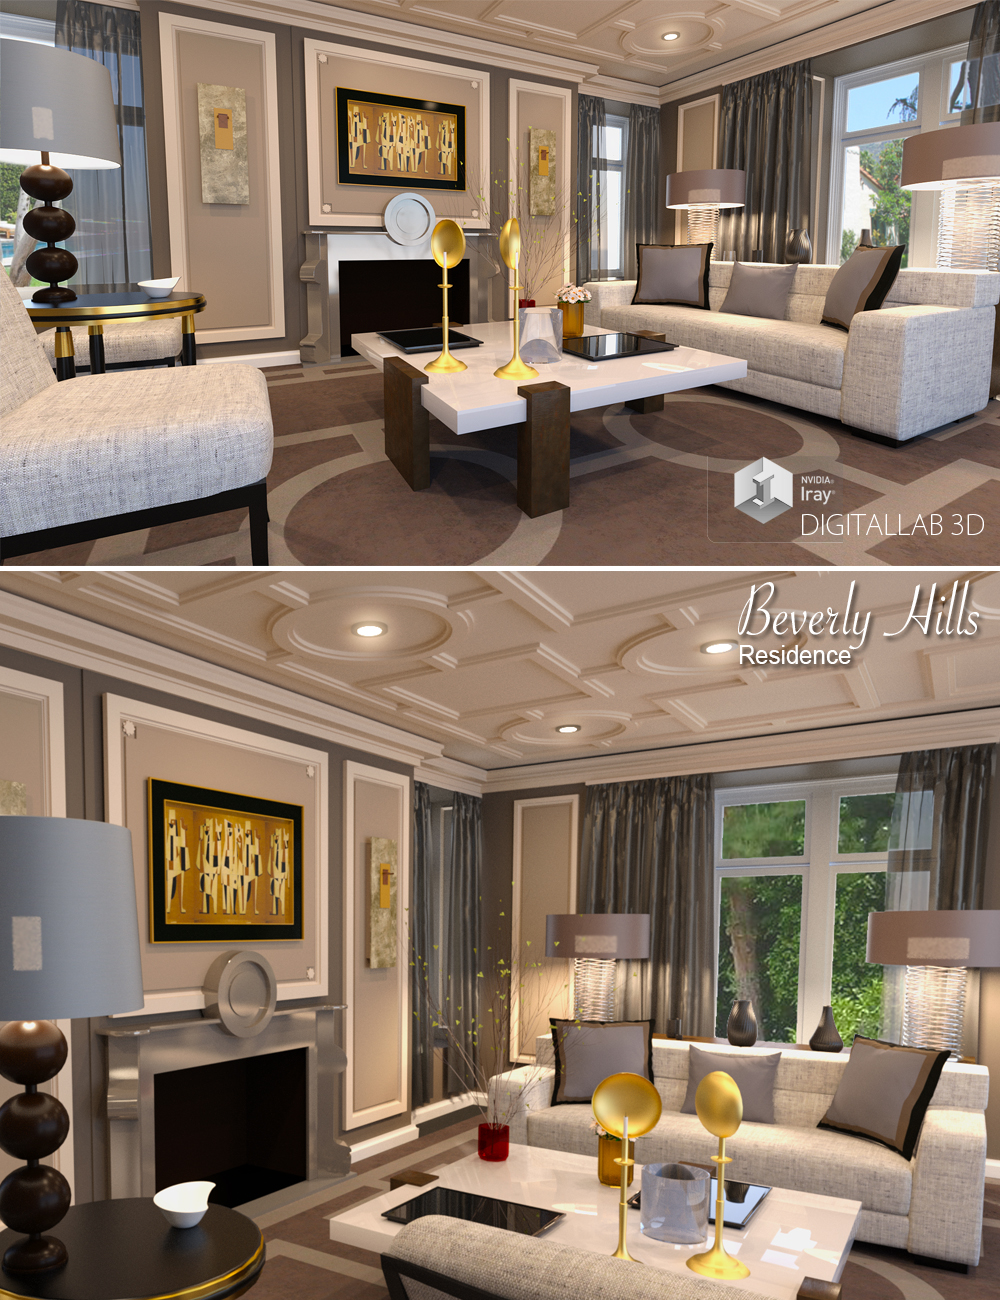 Beverly Hills Residence by: Digitallab3D, 3D Models by Daz 3D